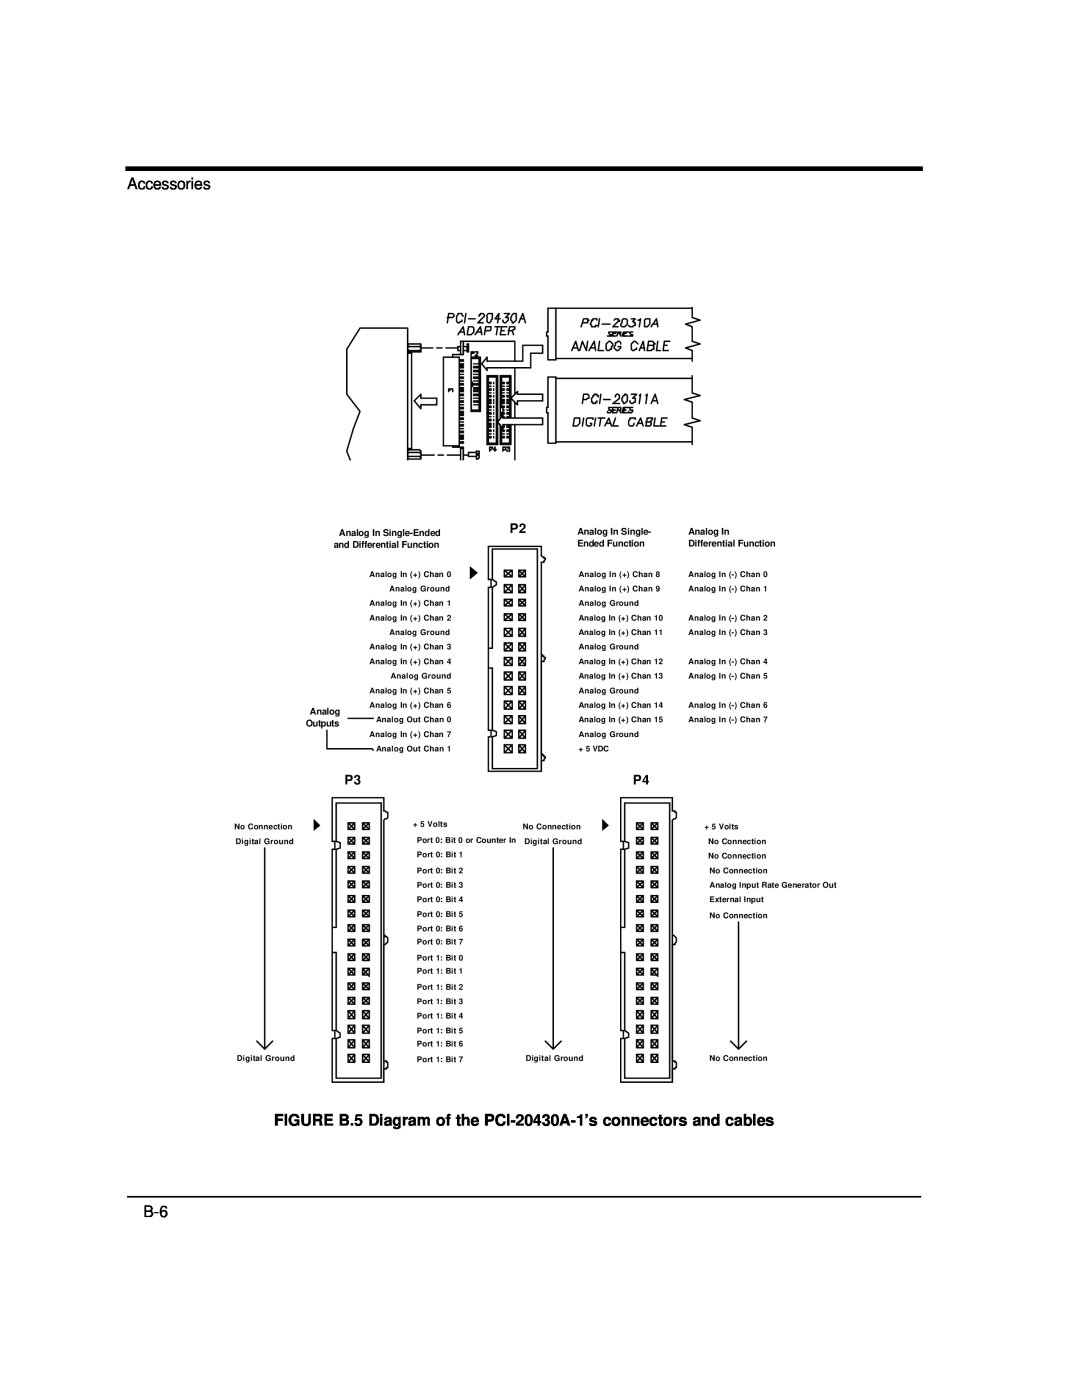 Intelligent Motion Systems UDAS-1001E user manual FIGURE B.5 Diagram of the PCI-20430A-1’s connectors and cables, Analog 